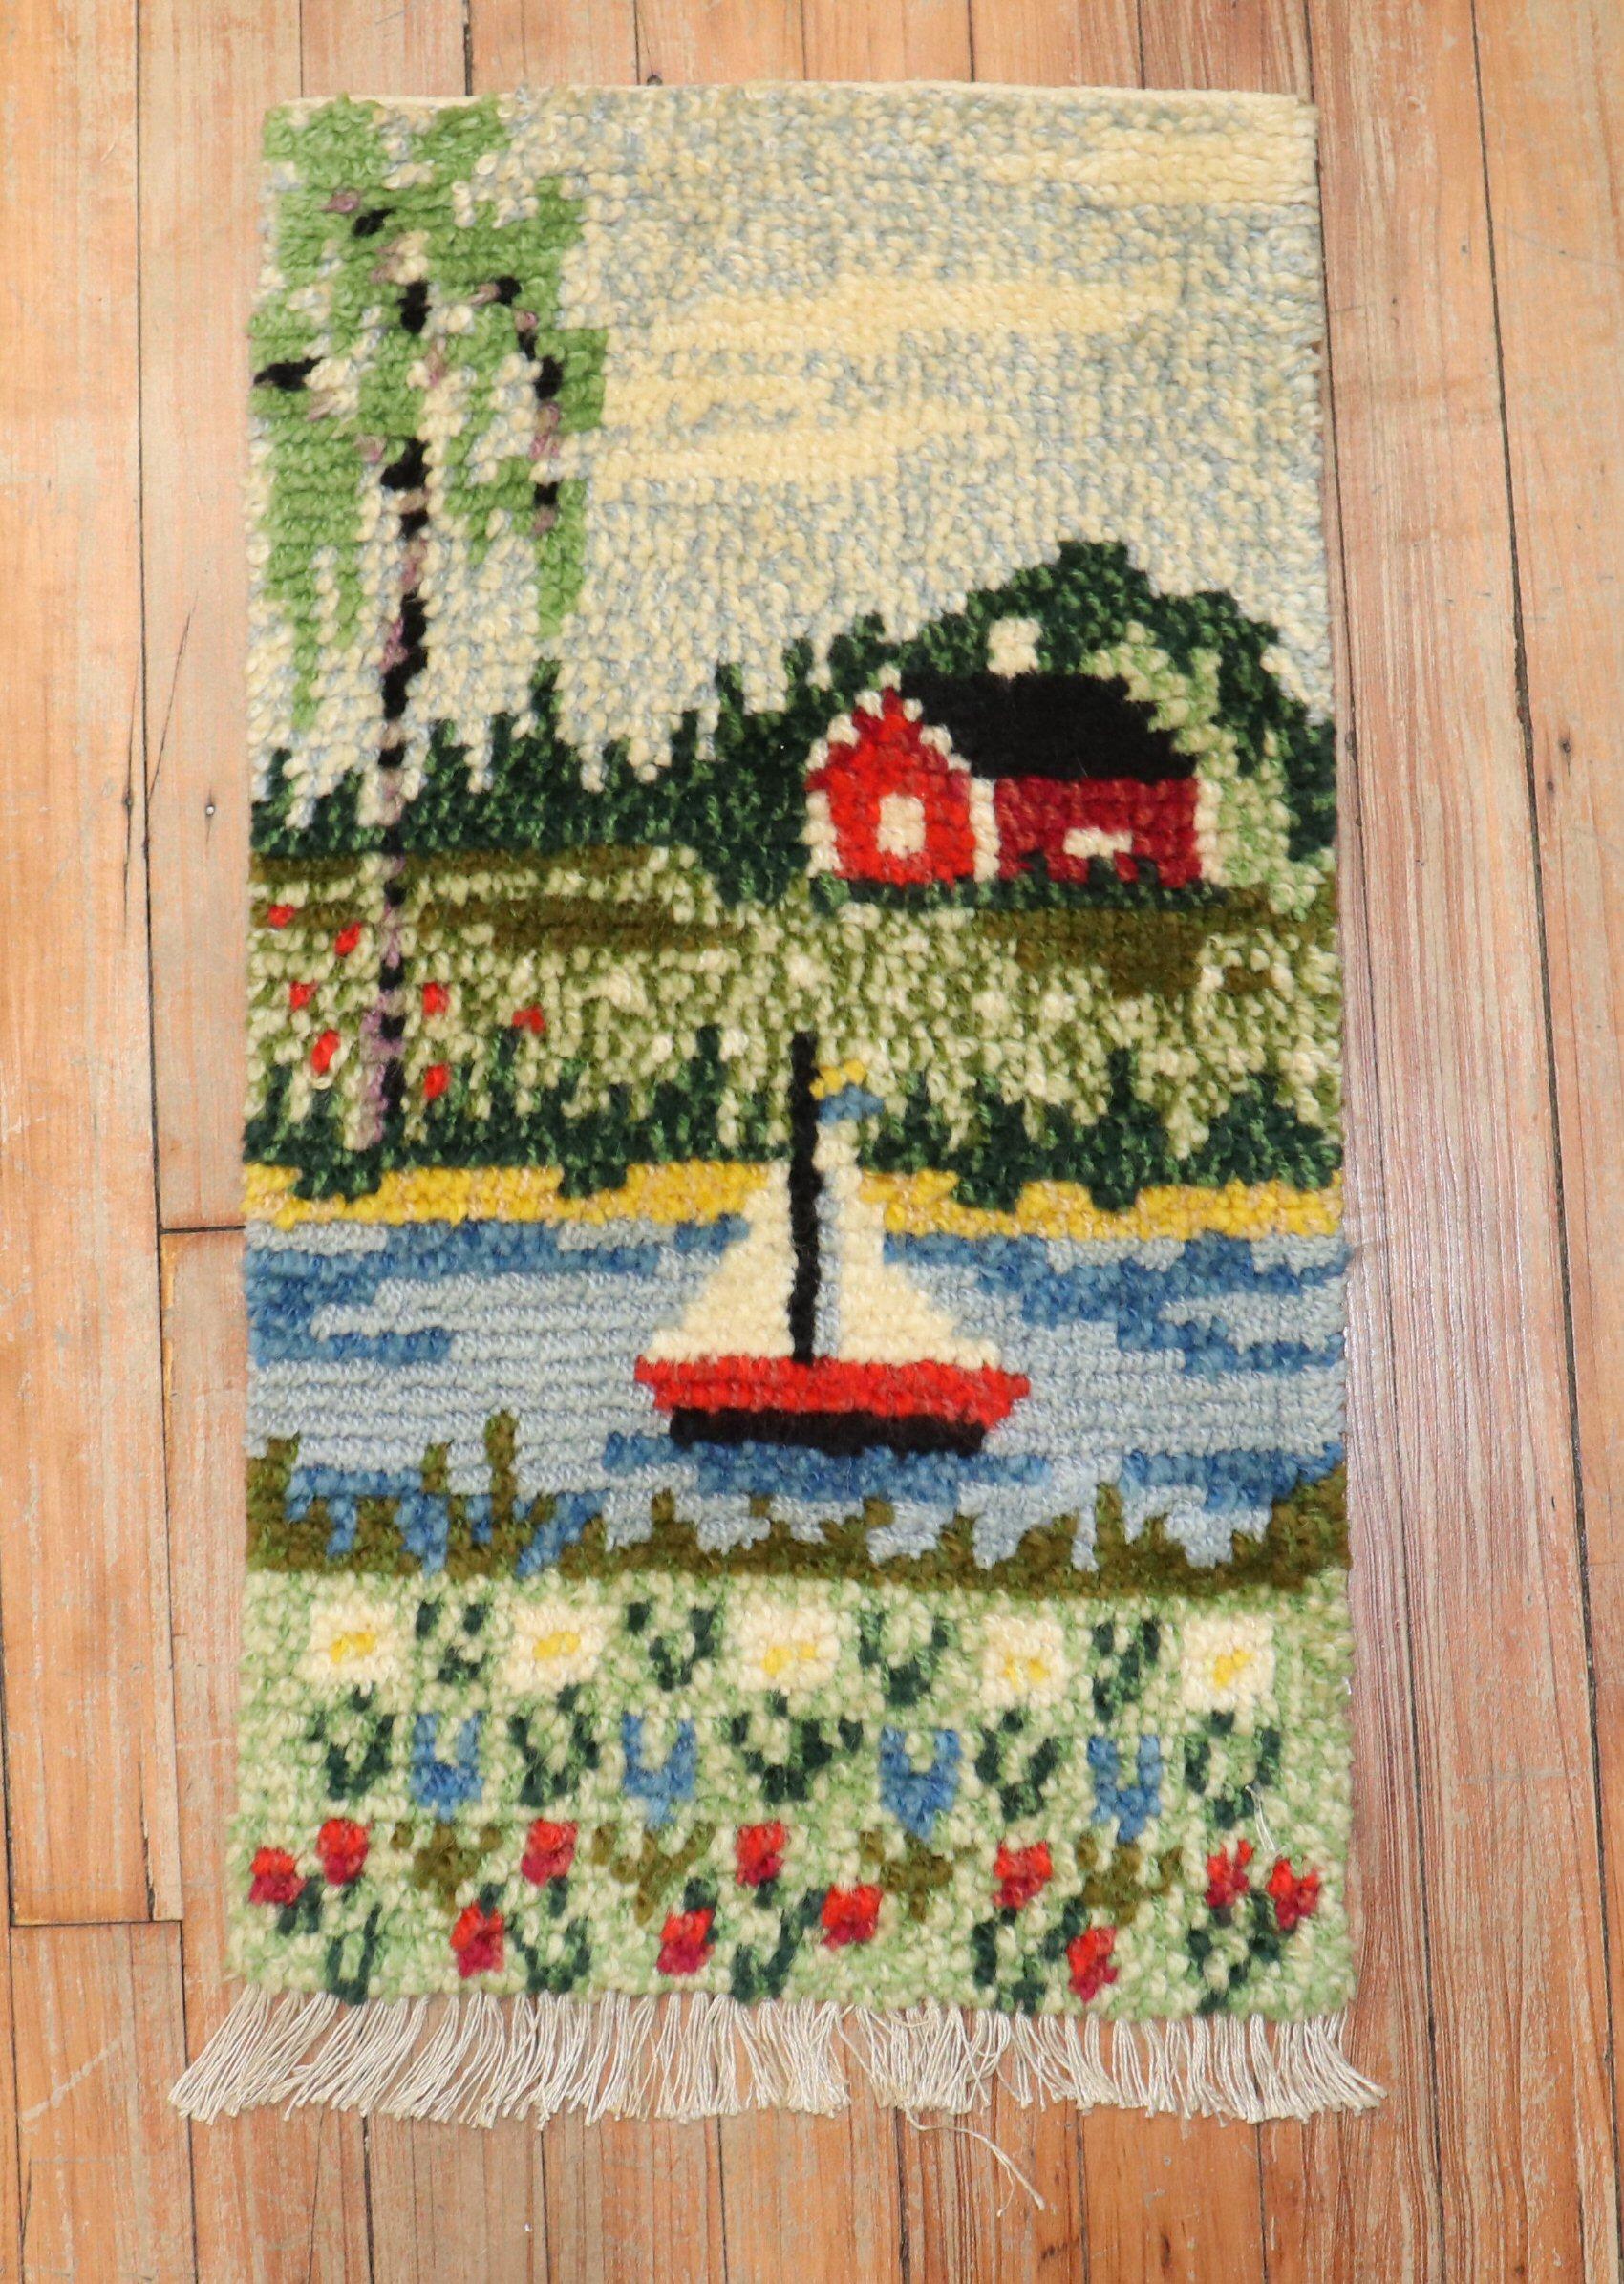 Marvelous small plush Swedish Rya rug from the 21st century with a pictorial motif

Measures: 1'2” x 2'1”

Swedish Rya rugs are extremely colorful, lovely and quite chic and each have their own character to them. They tend to have thicker shaggy